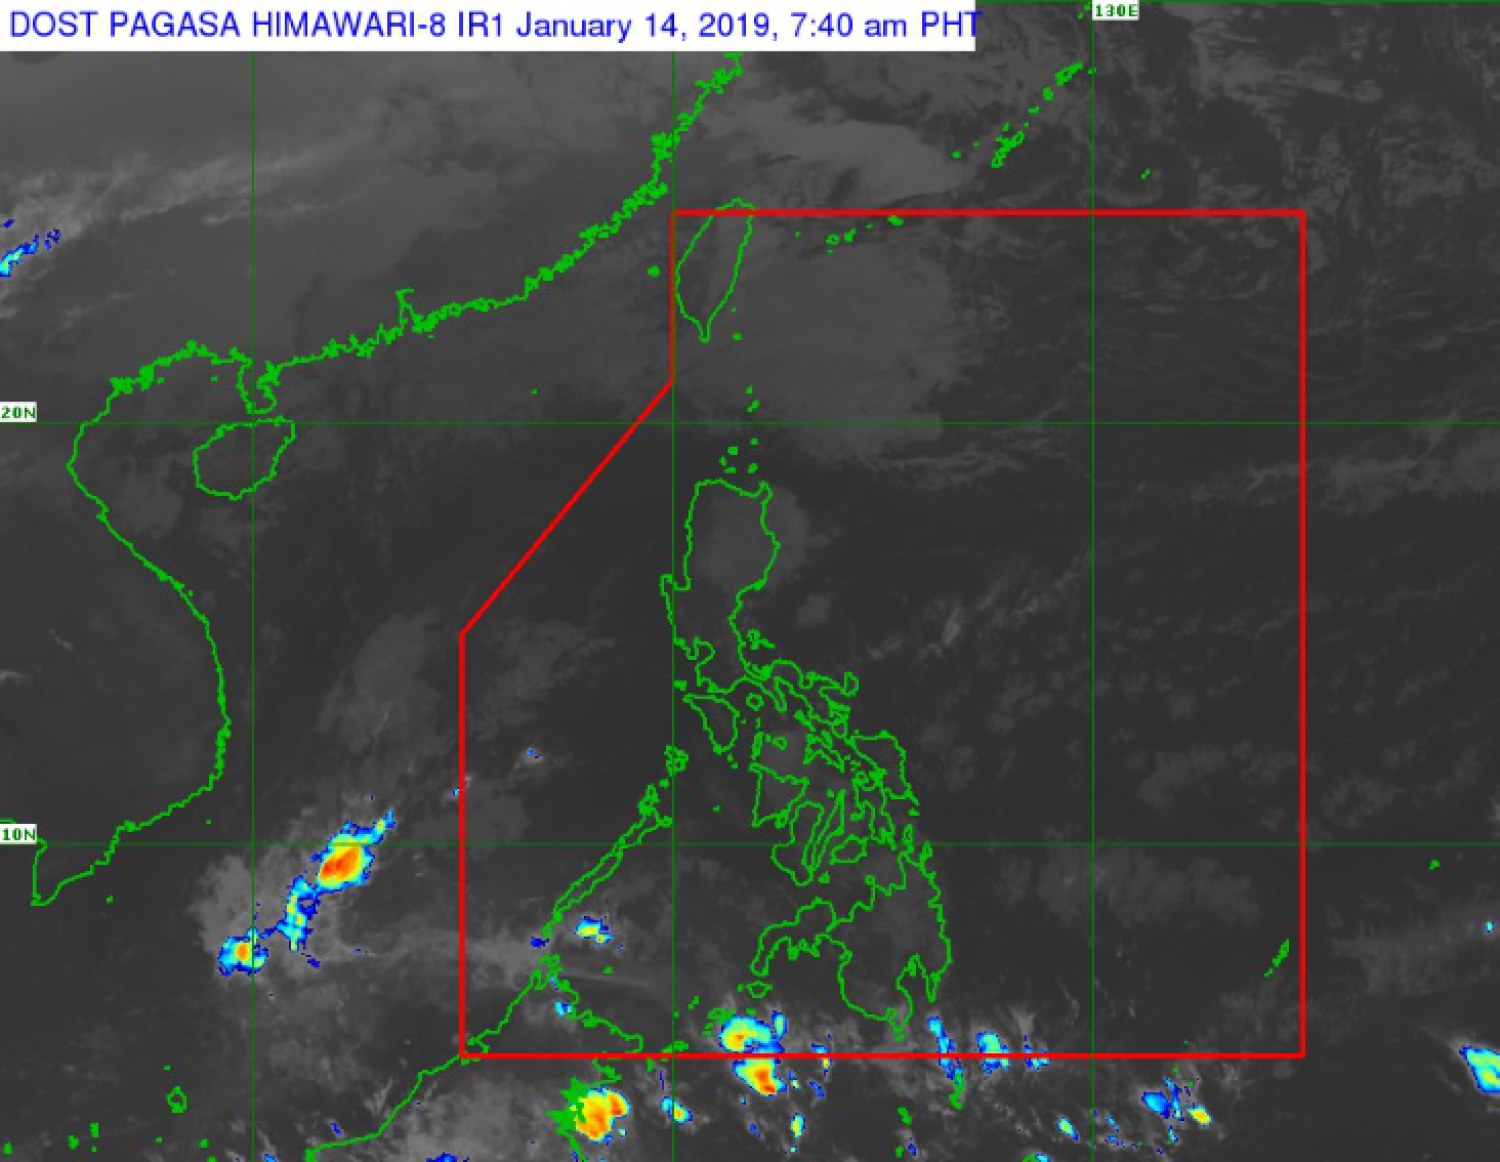 Pagasa: Cloudy skies, scattered rain over parts of Mindanao